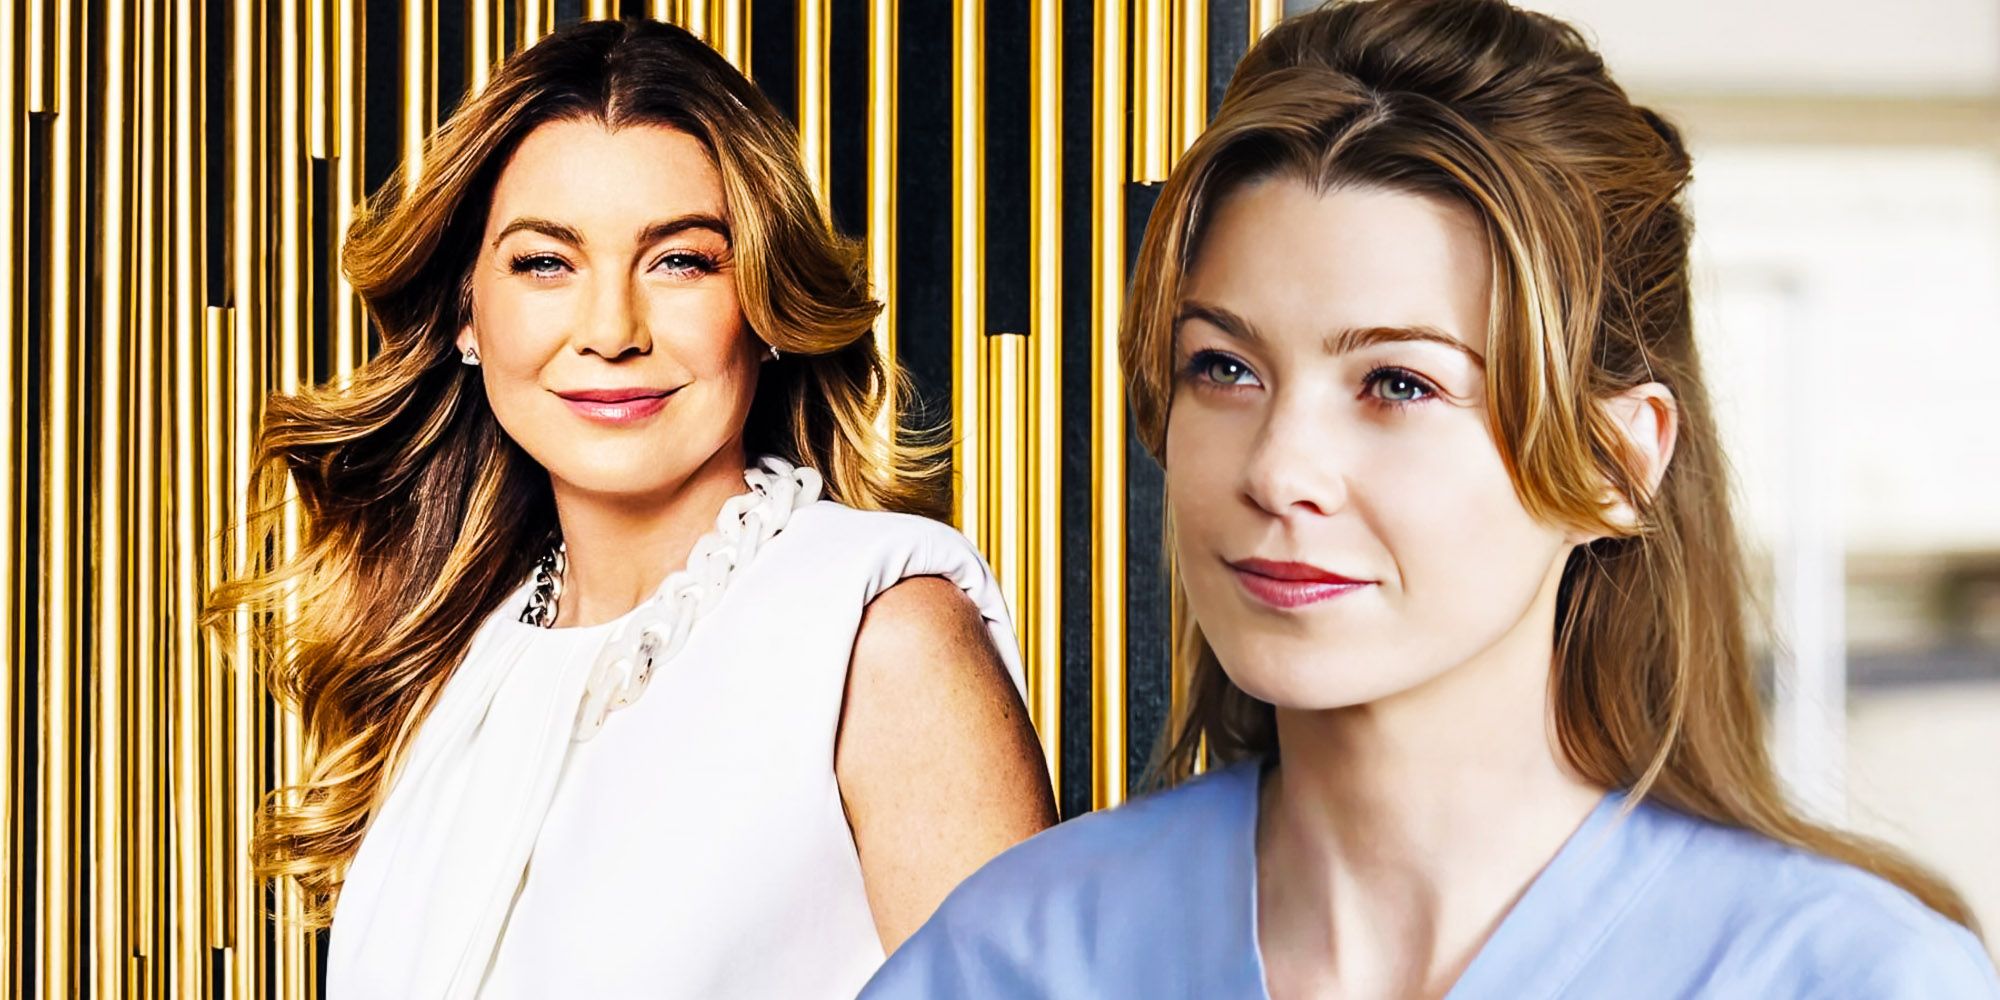 The 2 Greys Anatomy Episodes Directed By Ellen Pompeo